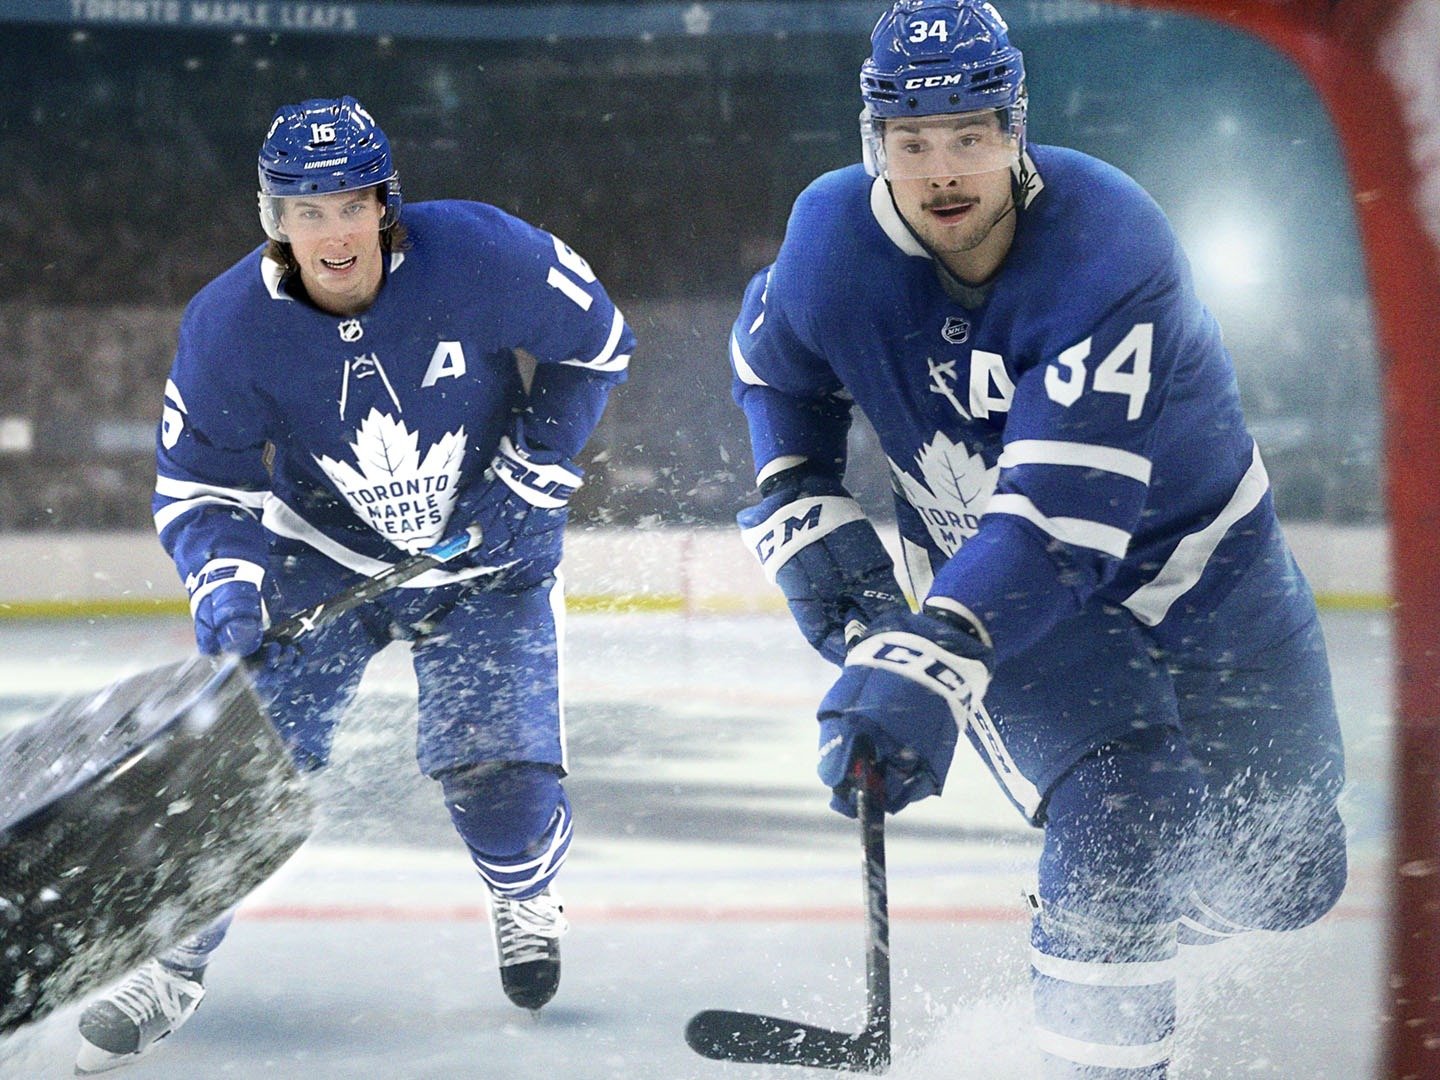 All or Nothing: Toronto Maple Leafs (TV Series 2021) - IMDb